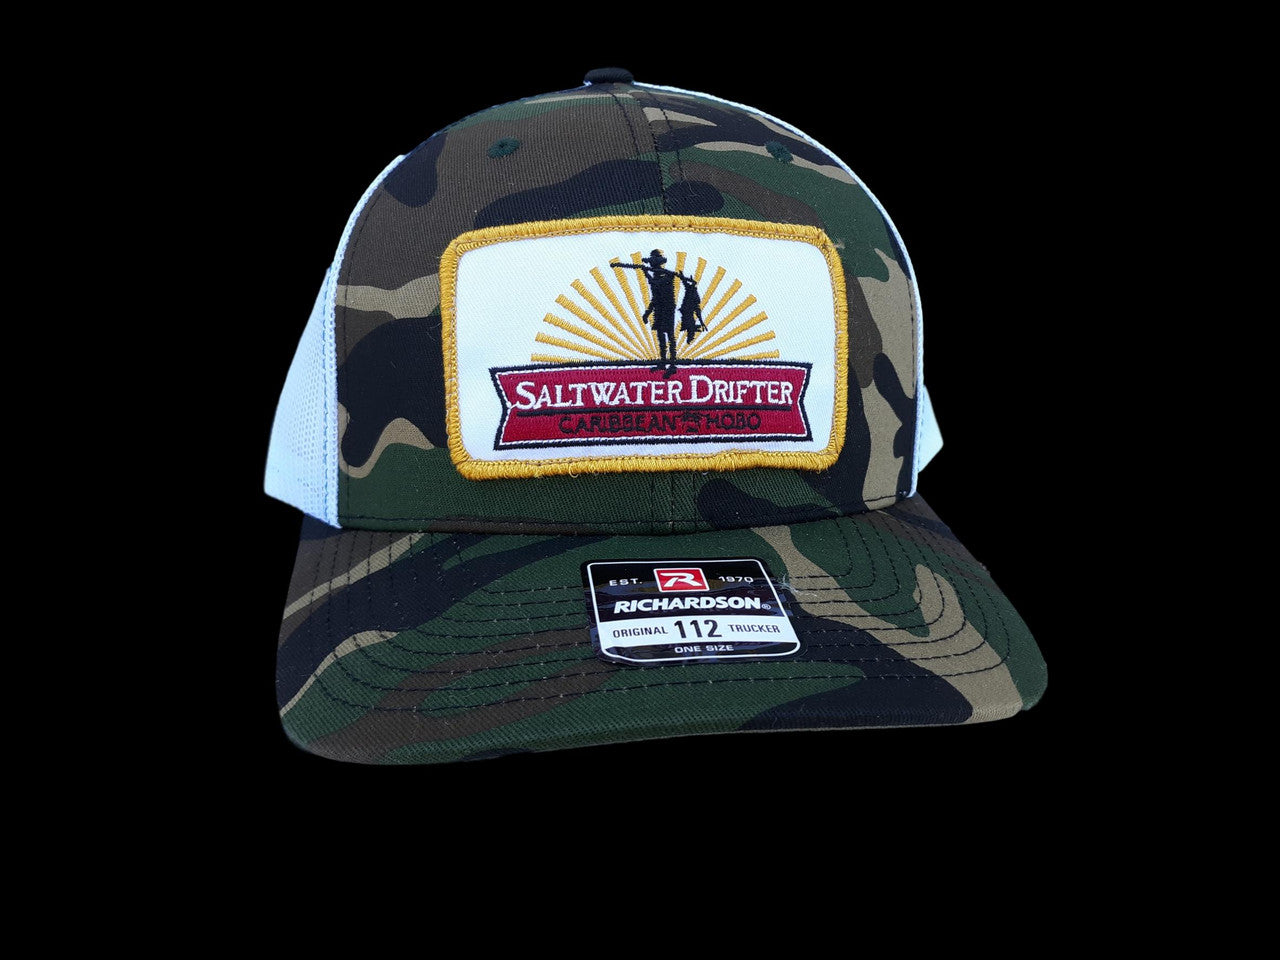 Camo Saltwater patch trucker patch hat